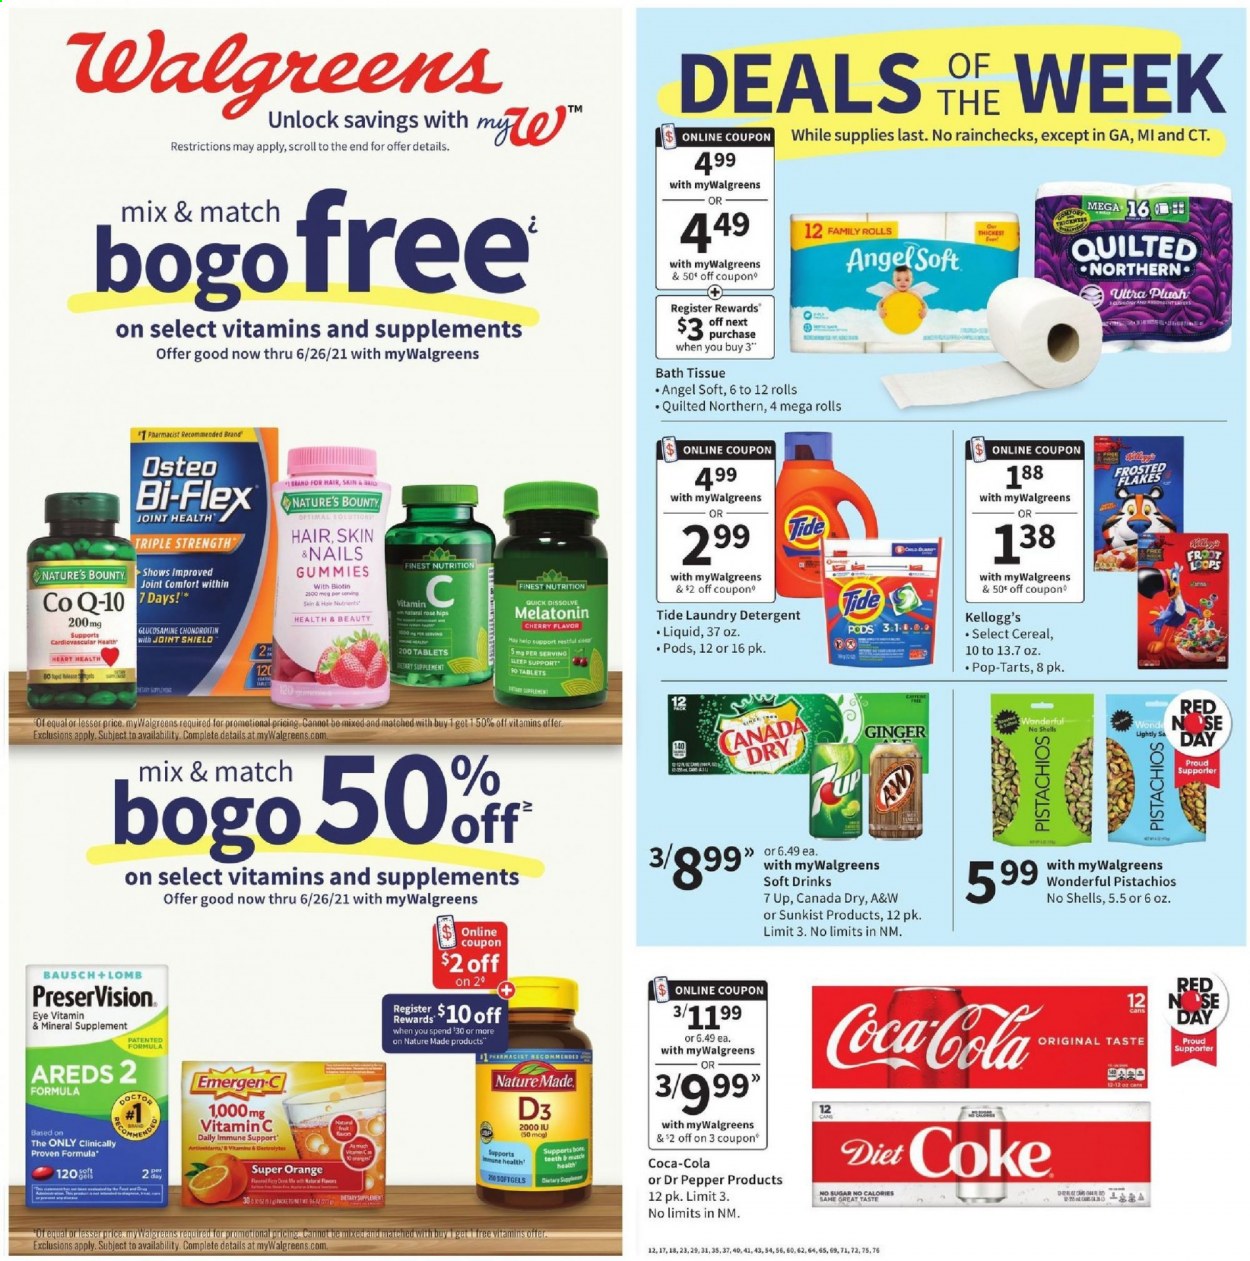 thumbnail - Walgreens Flyer - 05/16/2021 - 05/22/2021 - Sales products - Kellogg's, 7 Days, Pop-Tarts, cereals, Frosted Flakes, pistachios, Canada Dry, Coca-Cola, Dr. Pepper, Diet Coke, soft drink, 7UP, A&W, wine, rosé wine, bath tissue, Quilted Northern, detergent, Tide, laundry detergent, Biotin, glucosamine, Nature Made, Nature's Bounty, vitamin c, Bi-Flex, Emergen-C, vitamin D3. Page 1.